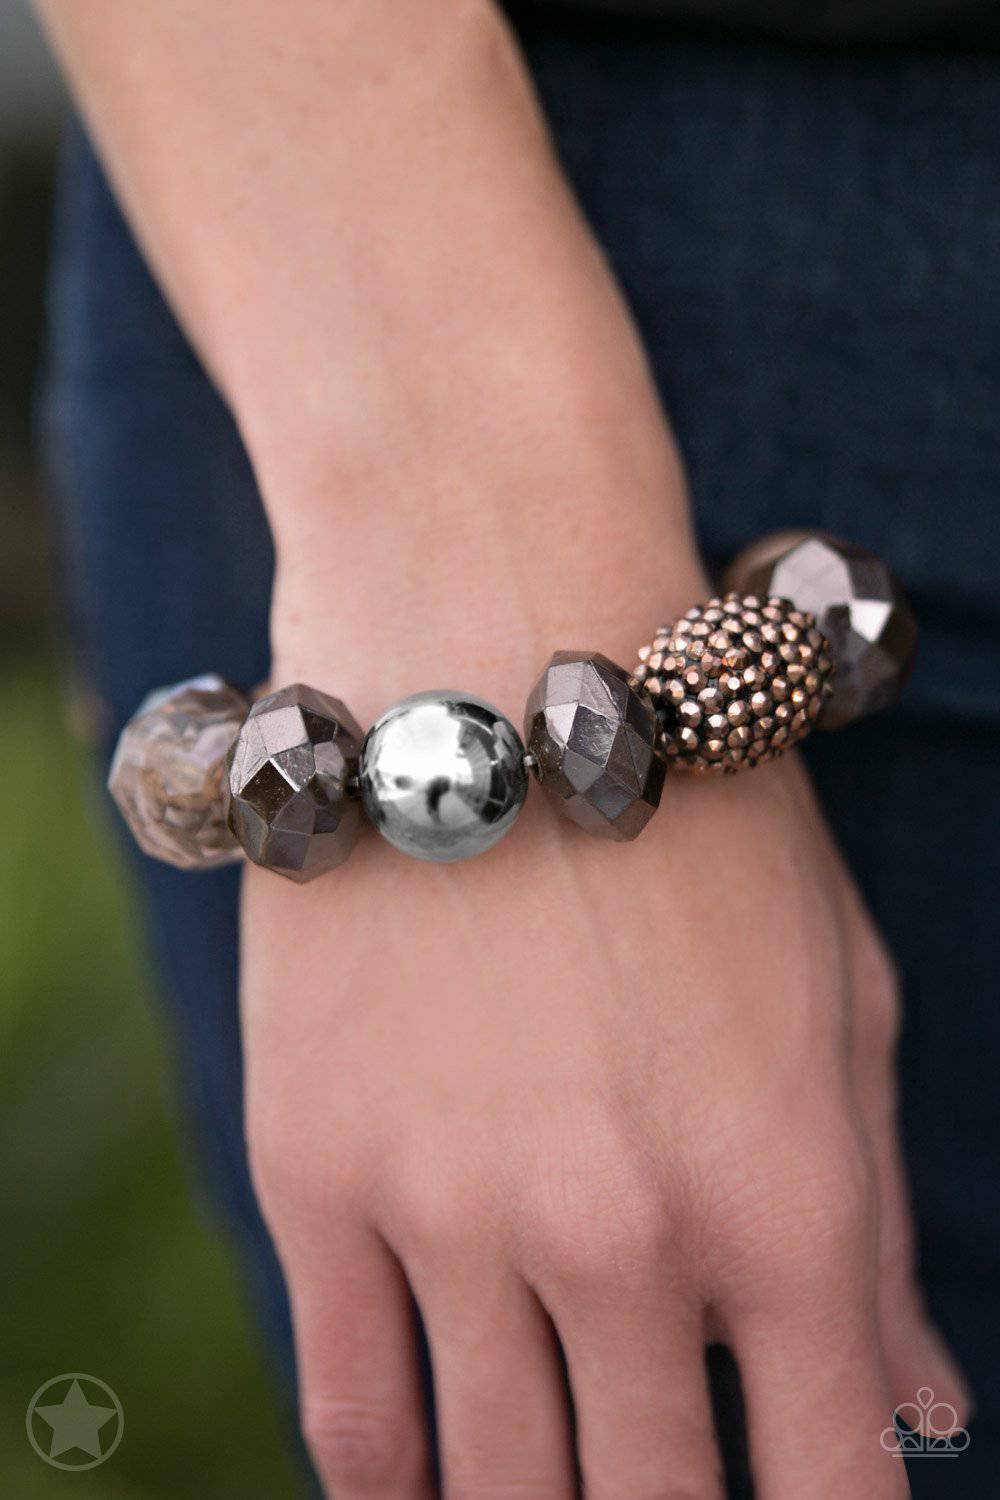 All Cozied Up - Brown & Copper Bracelet - Paparazzi Accessories - GlaMarous Titi Jewels